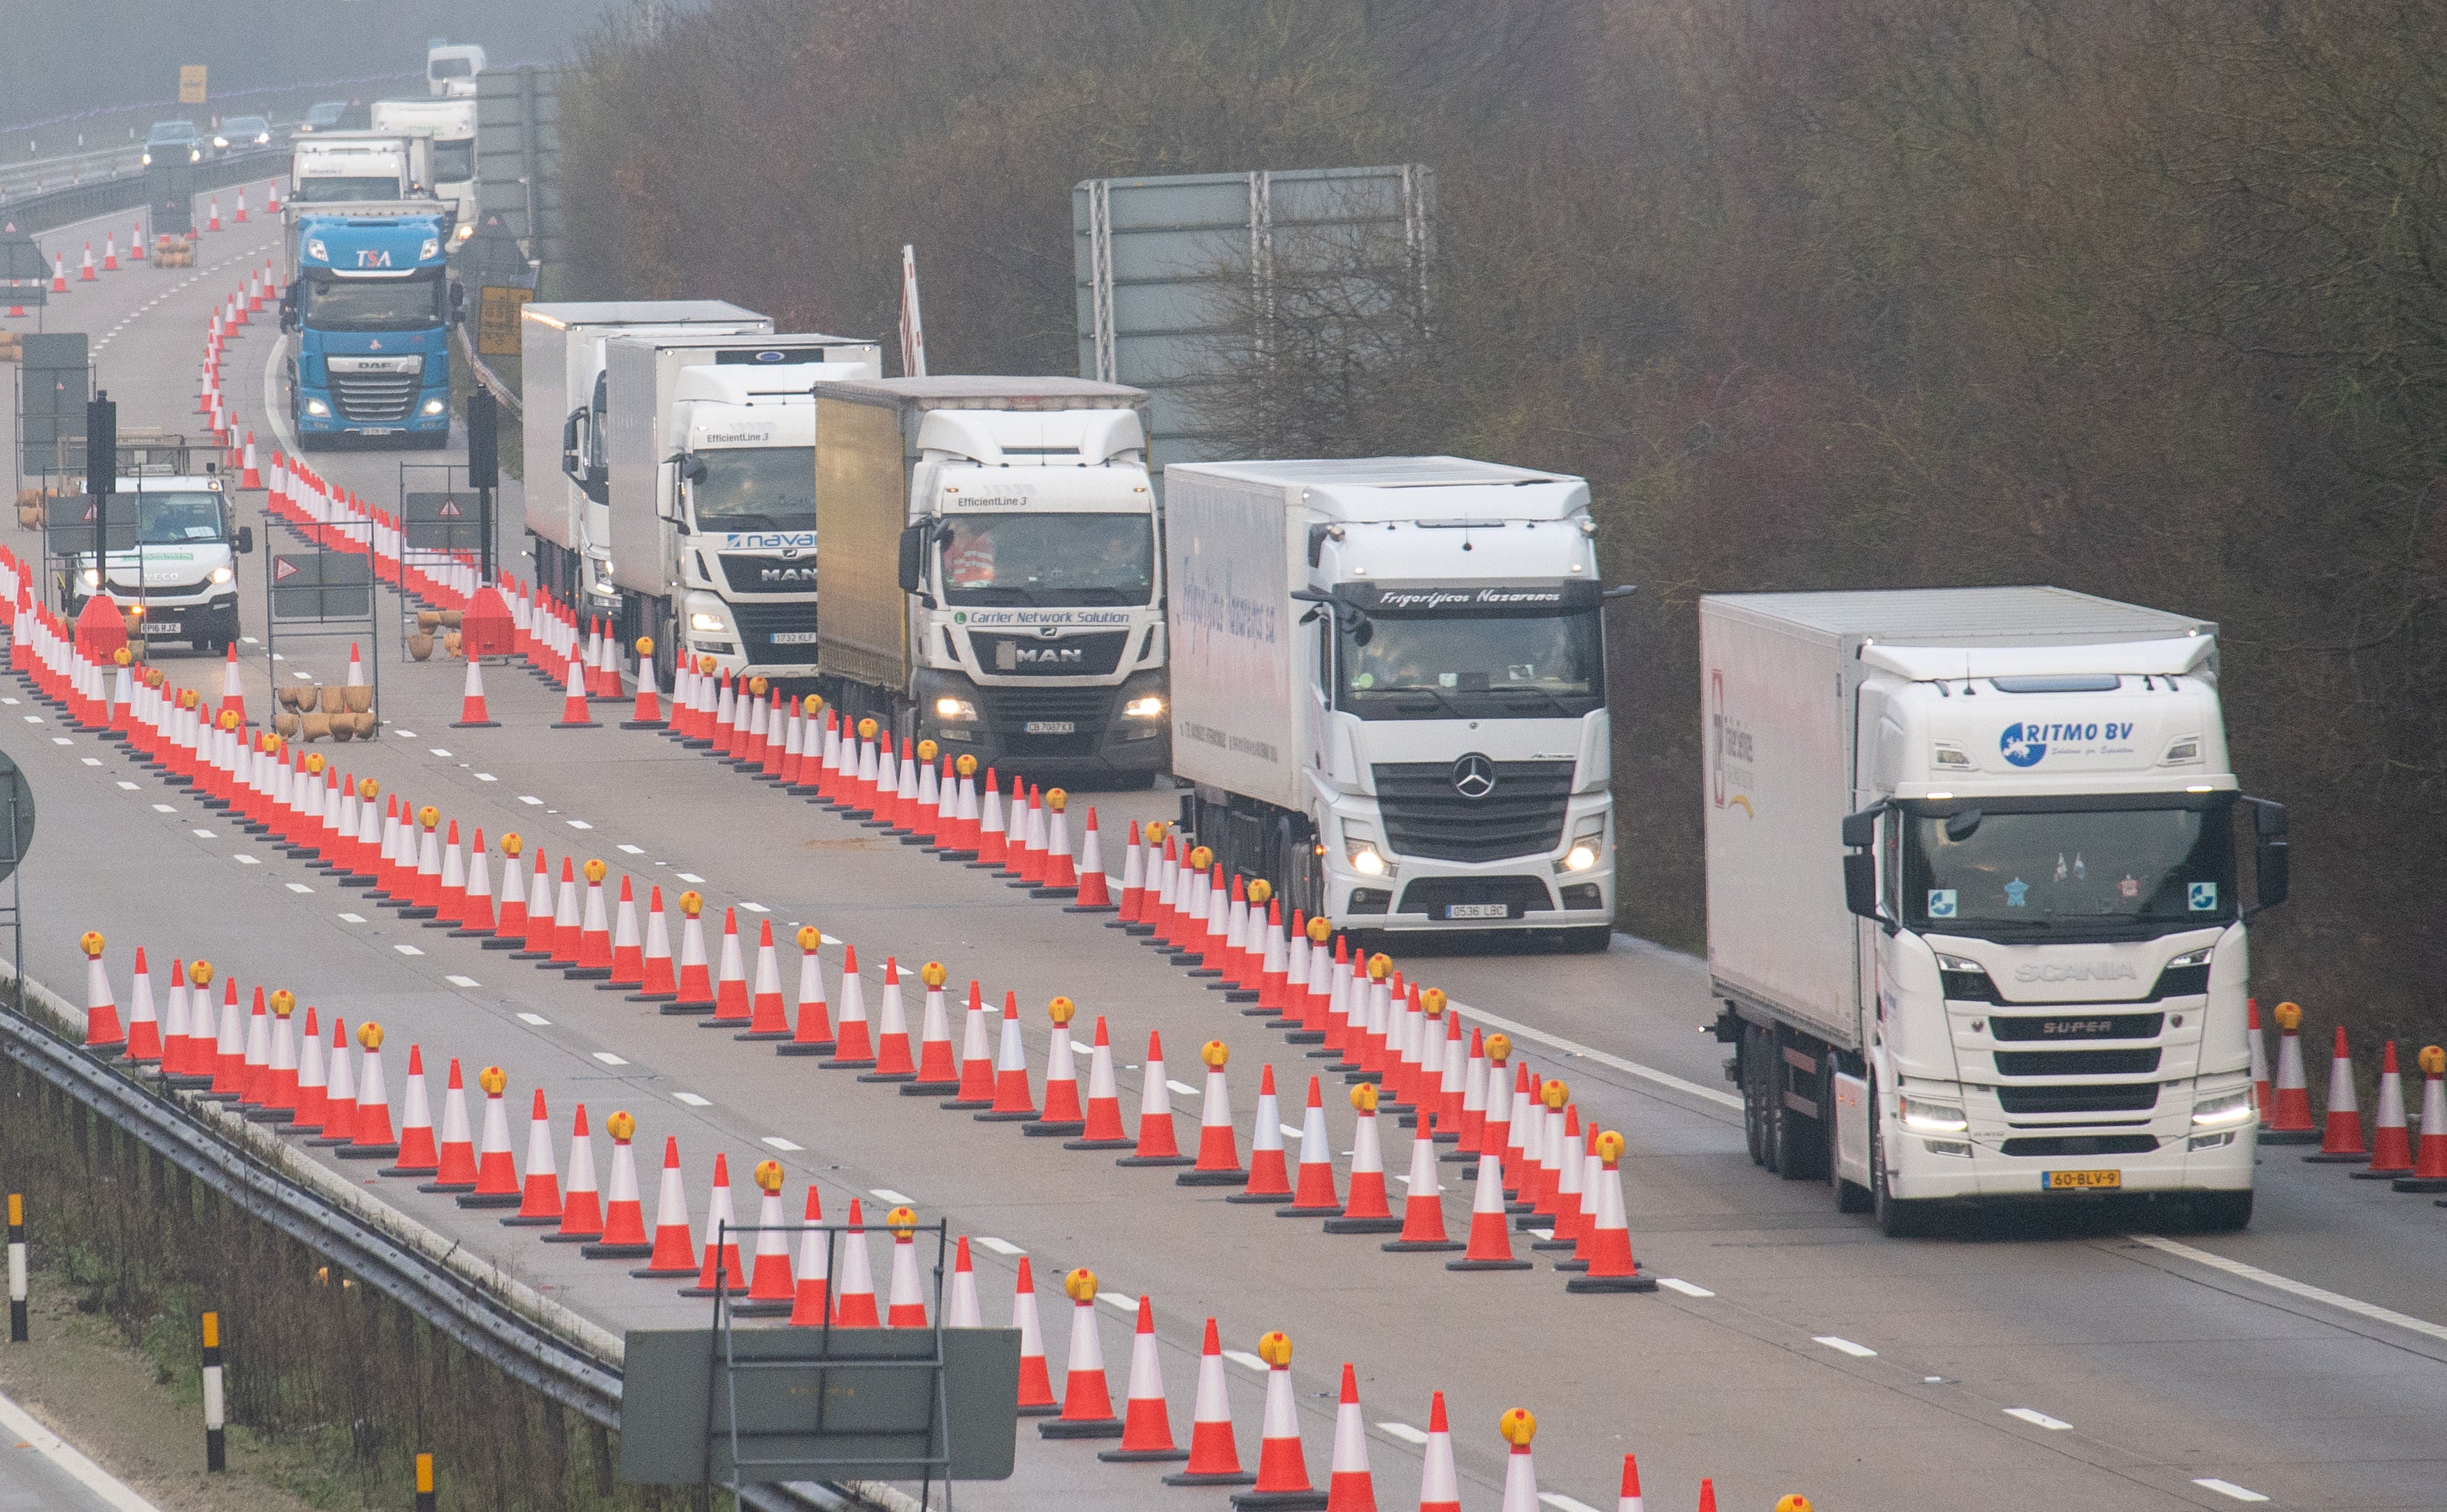 Freight lorries separated from other traffic on a Dover-bound section of the M20 motorway in Kent, during a live test by Highways England to mobilise Brock’s moveable barrier system in December 2020